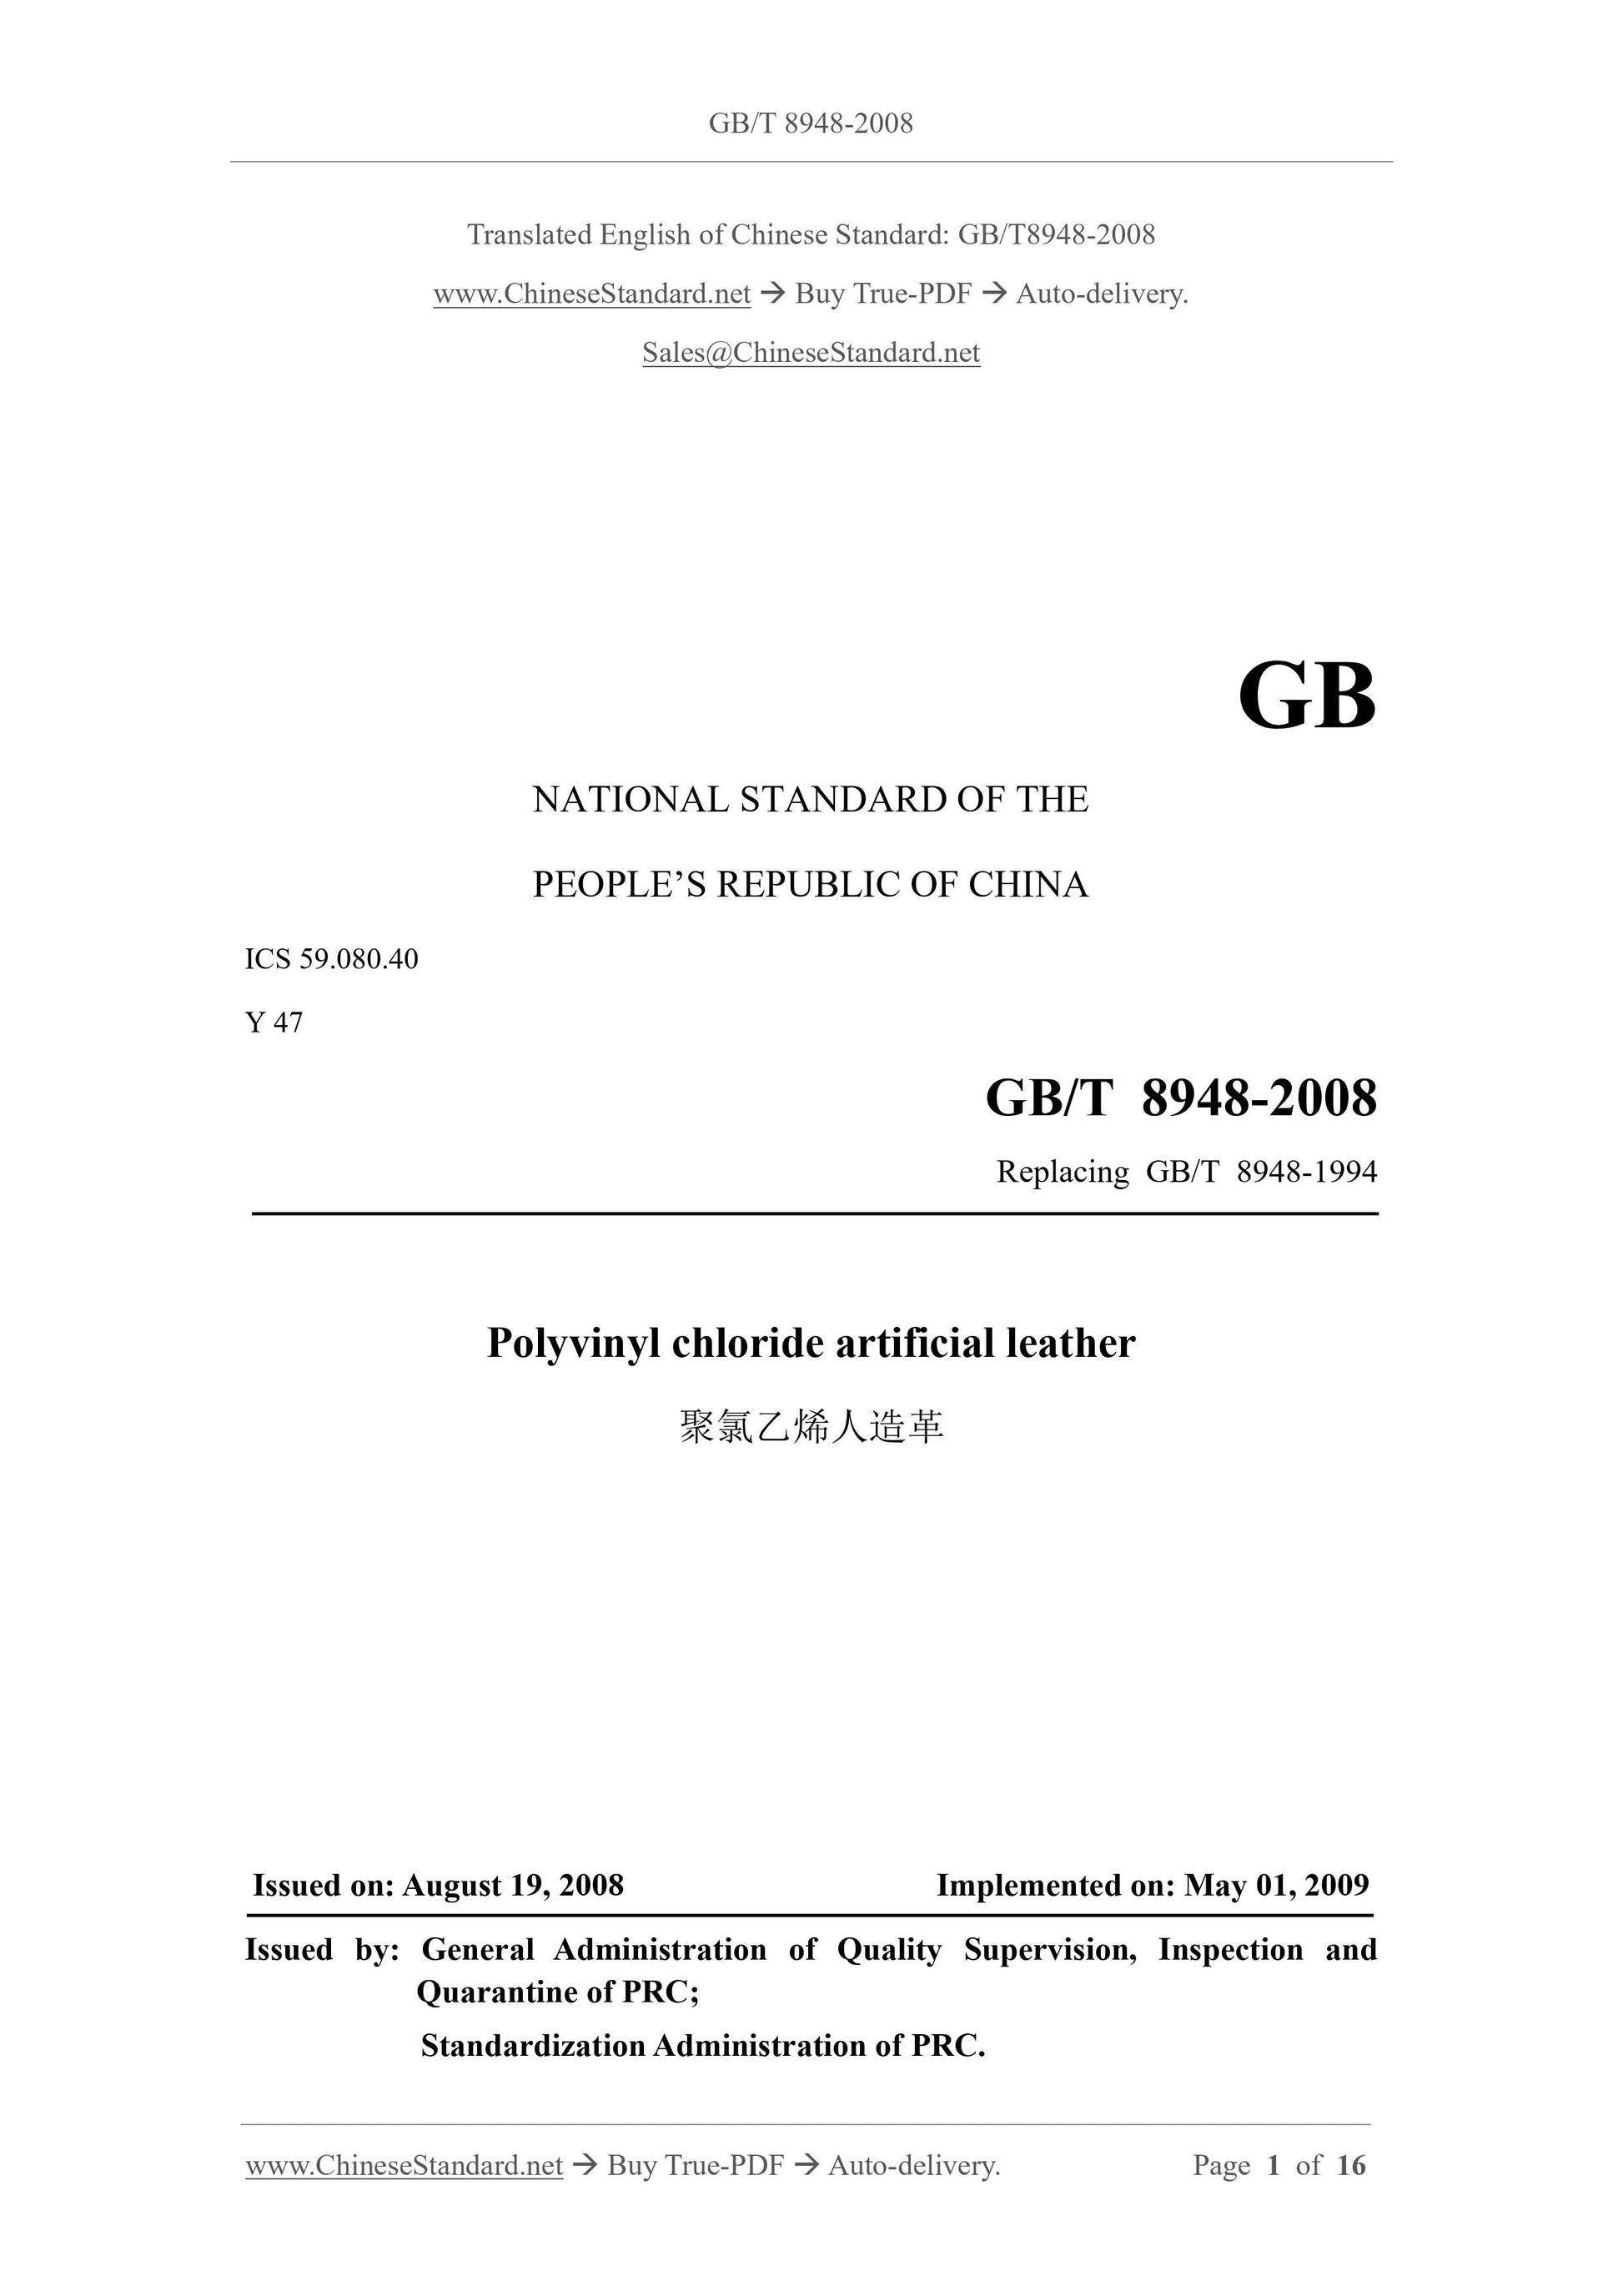 GB/T 8948-2008 Page 1